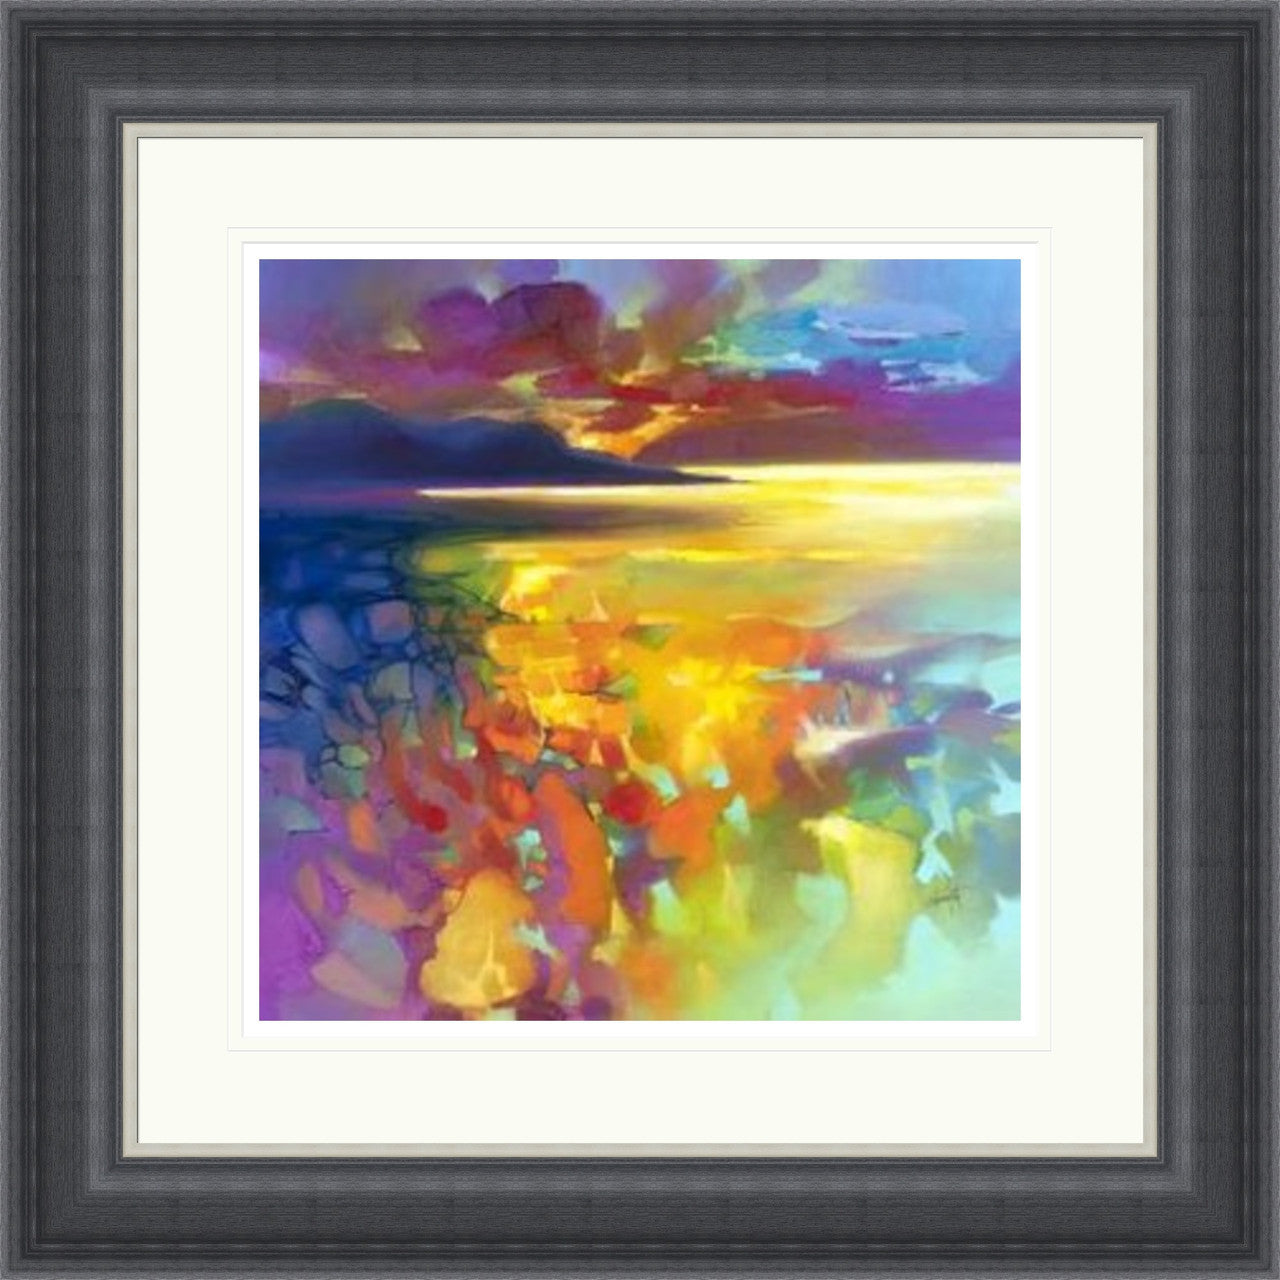 Lockdown Hope (Signed & Numbered Limited Edition) by Scott Naismith